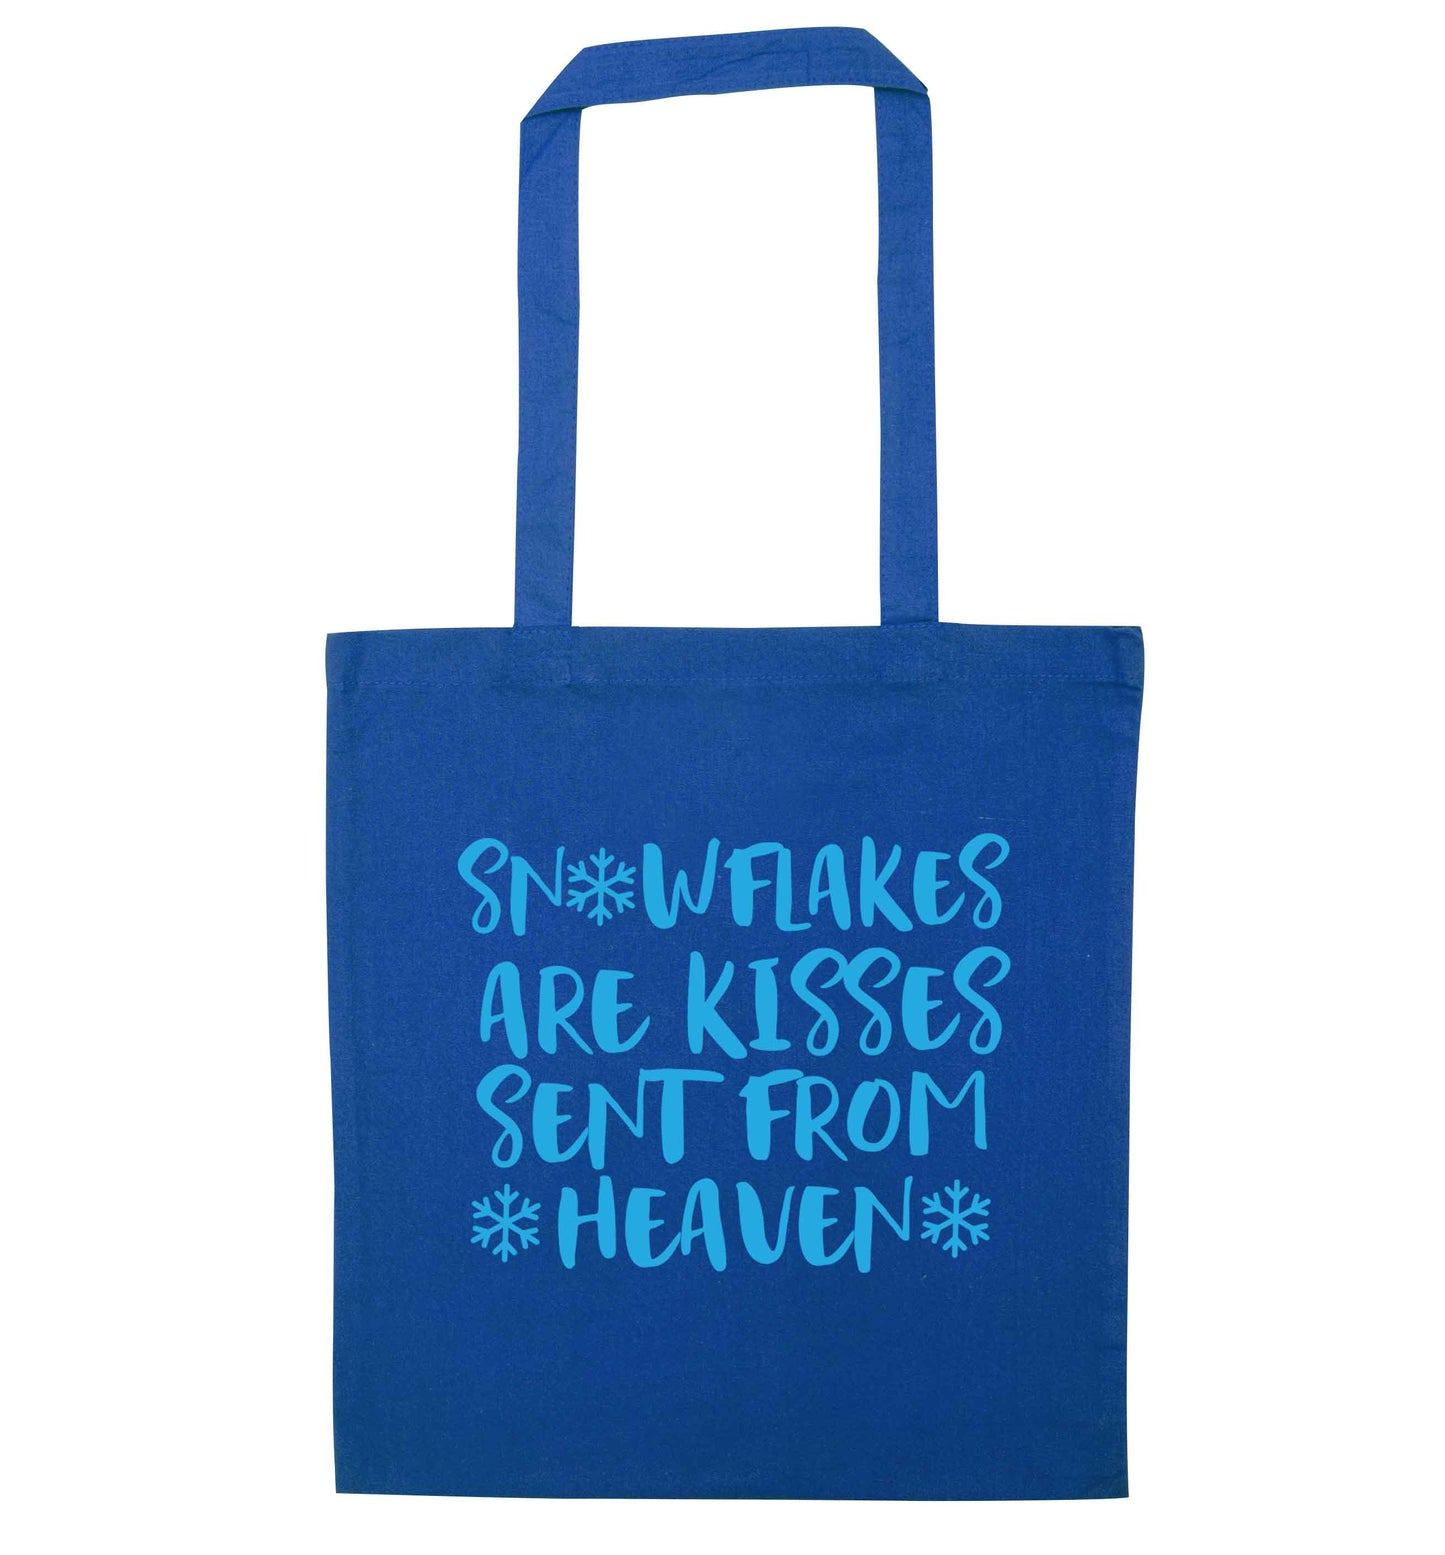 Snowflakes are kisses sent from heaven blue tote bag